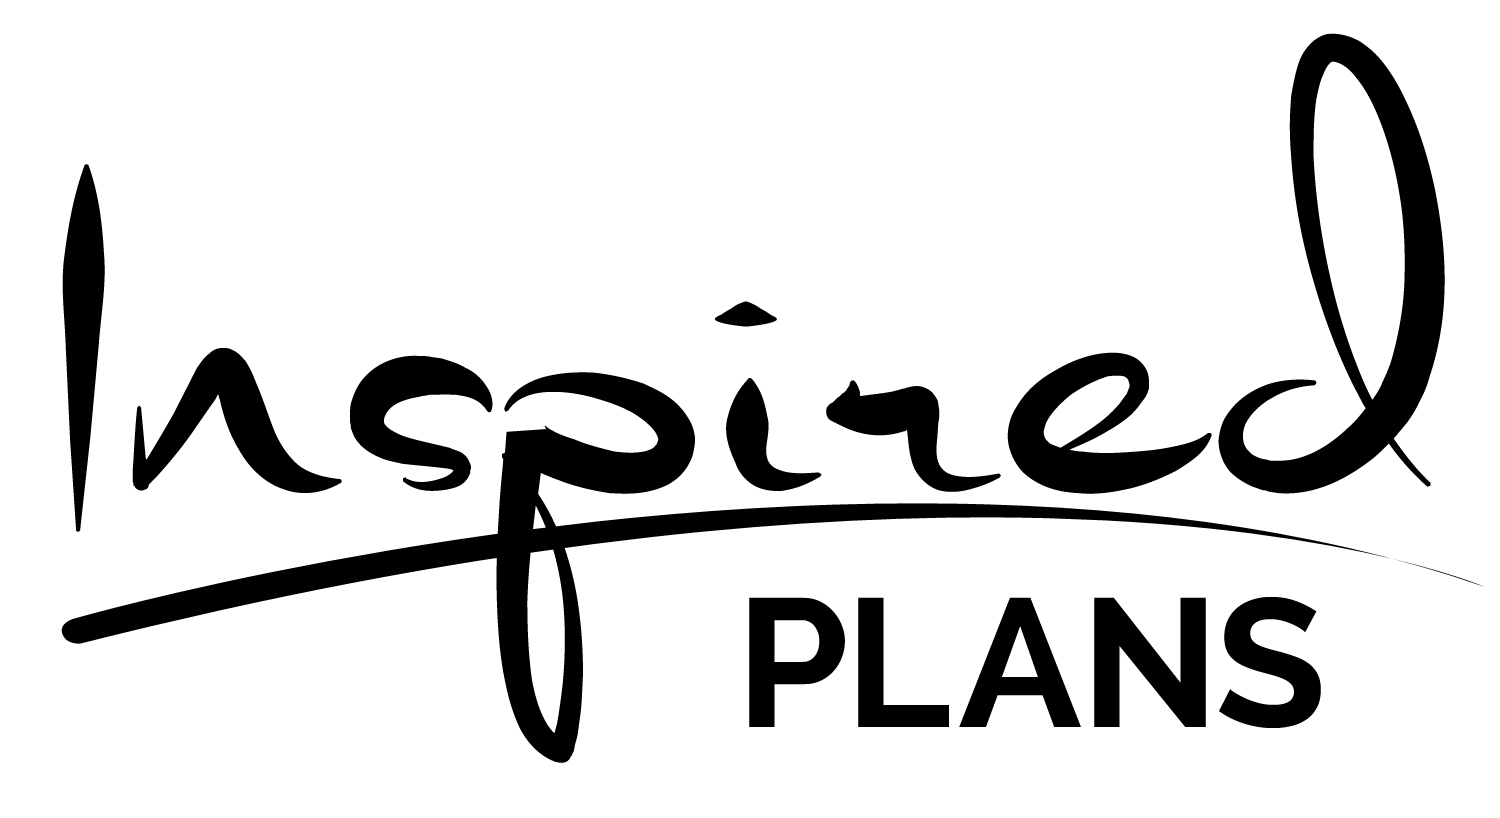 Logo of Inspired Plans Architectural Services In Staines, Surrey